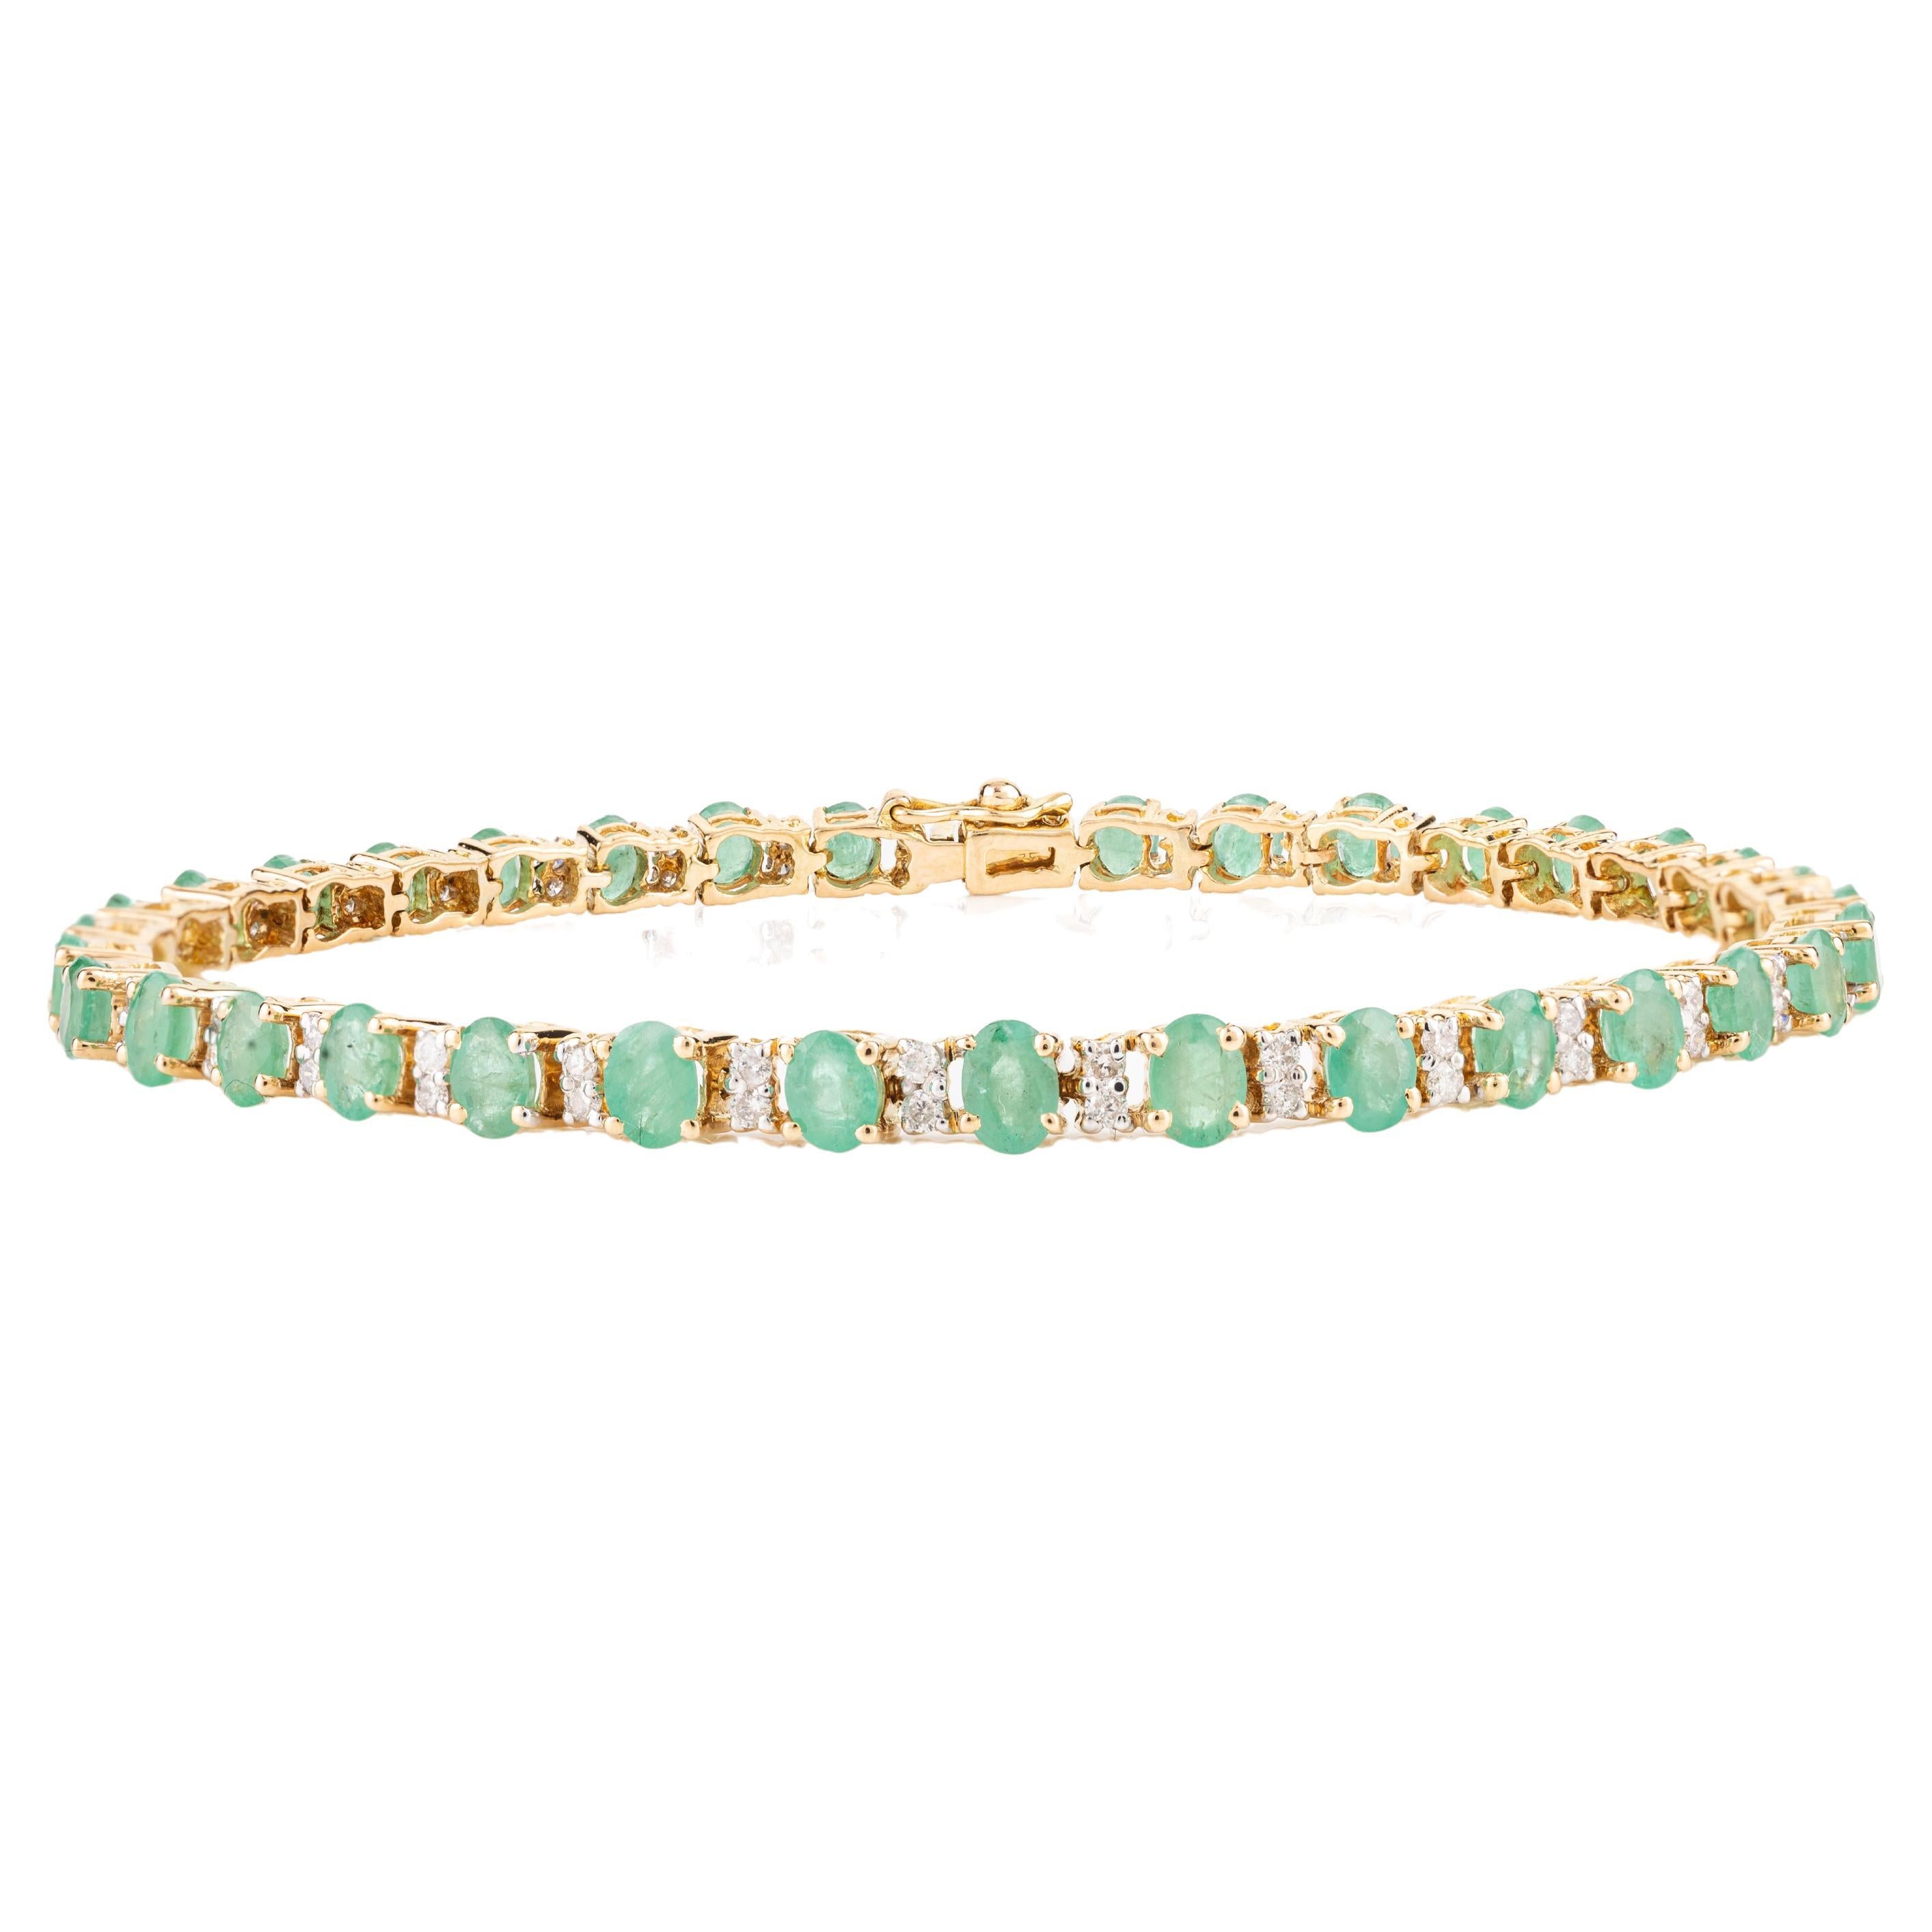 5.68 Carat Oval Cut Emerald and Diamond Tennis Bracelet in 18k Yellow Gold For Sale